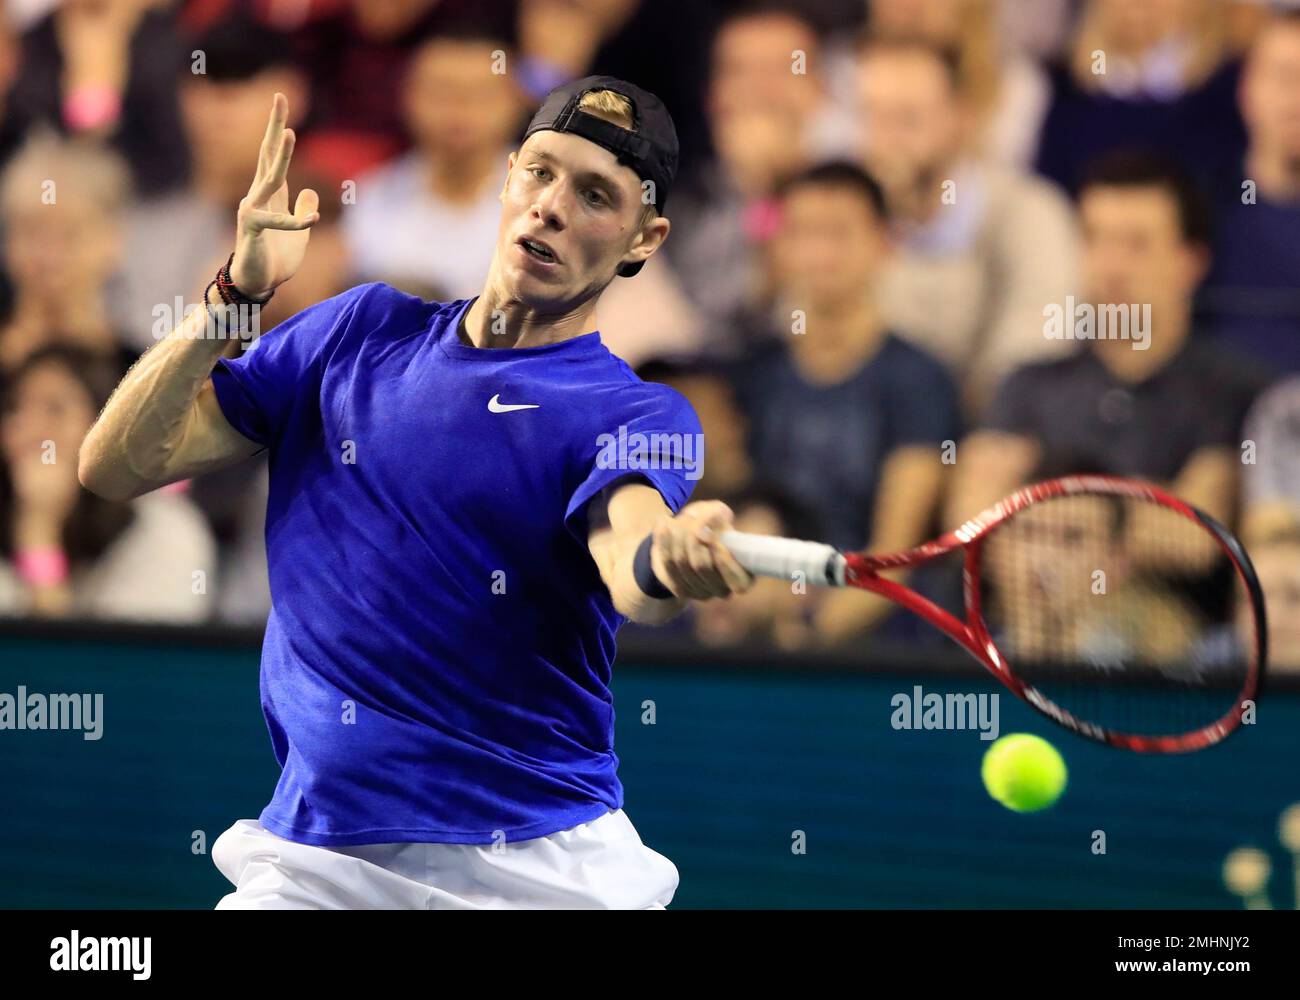 Canadian Denis Shapovalov returns the ball to German Alexander Zverev during the 3rd round match of the Paris Masters tennis tournament in Paris, France, Thursday, Oct